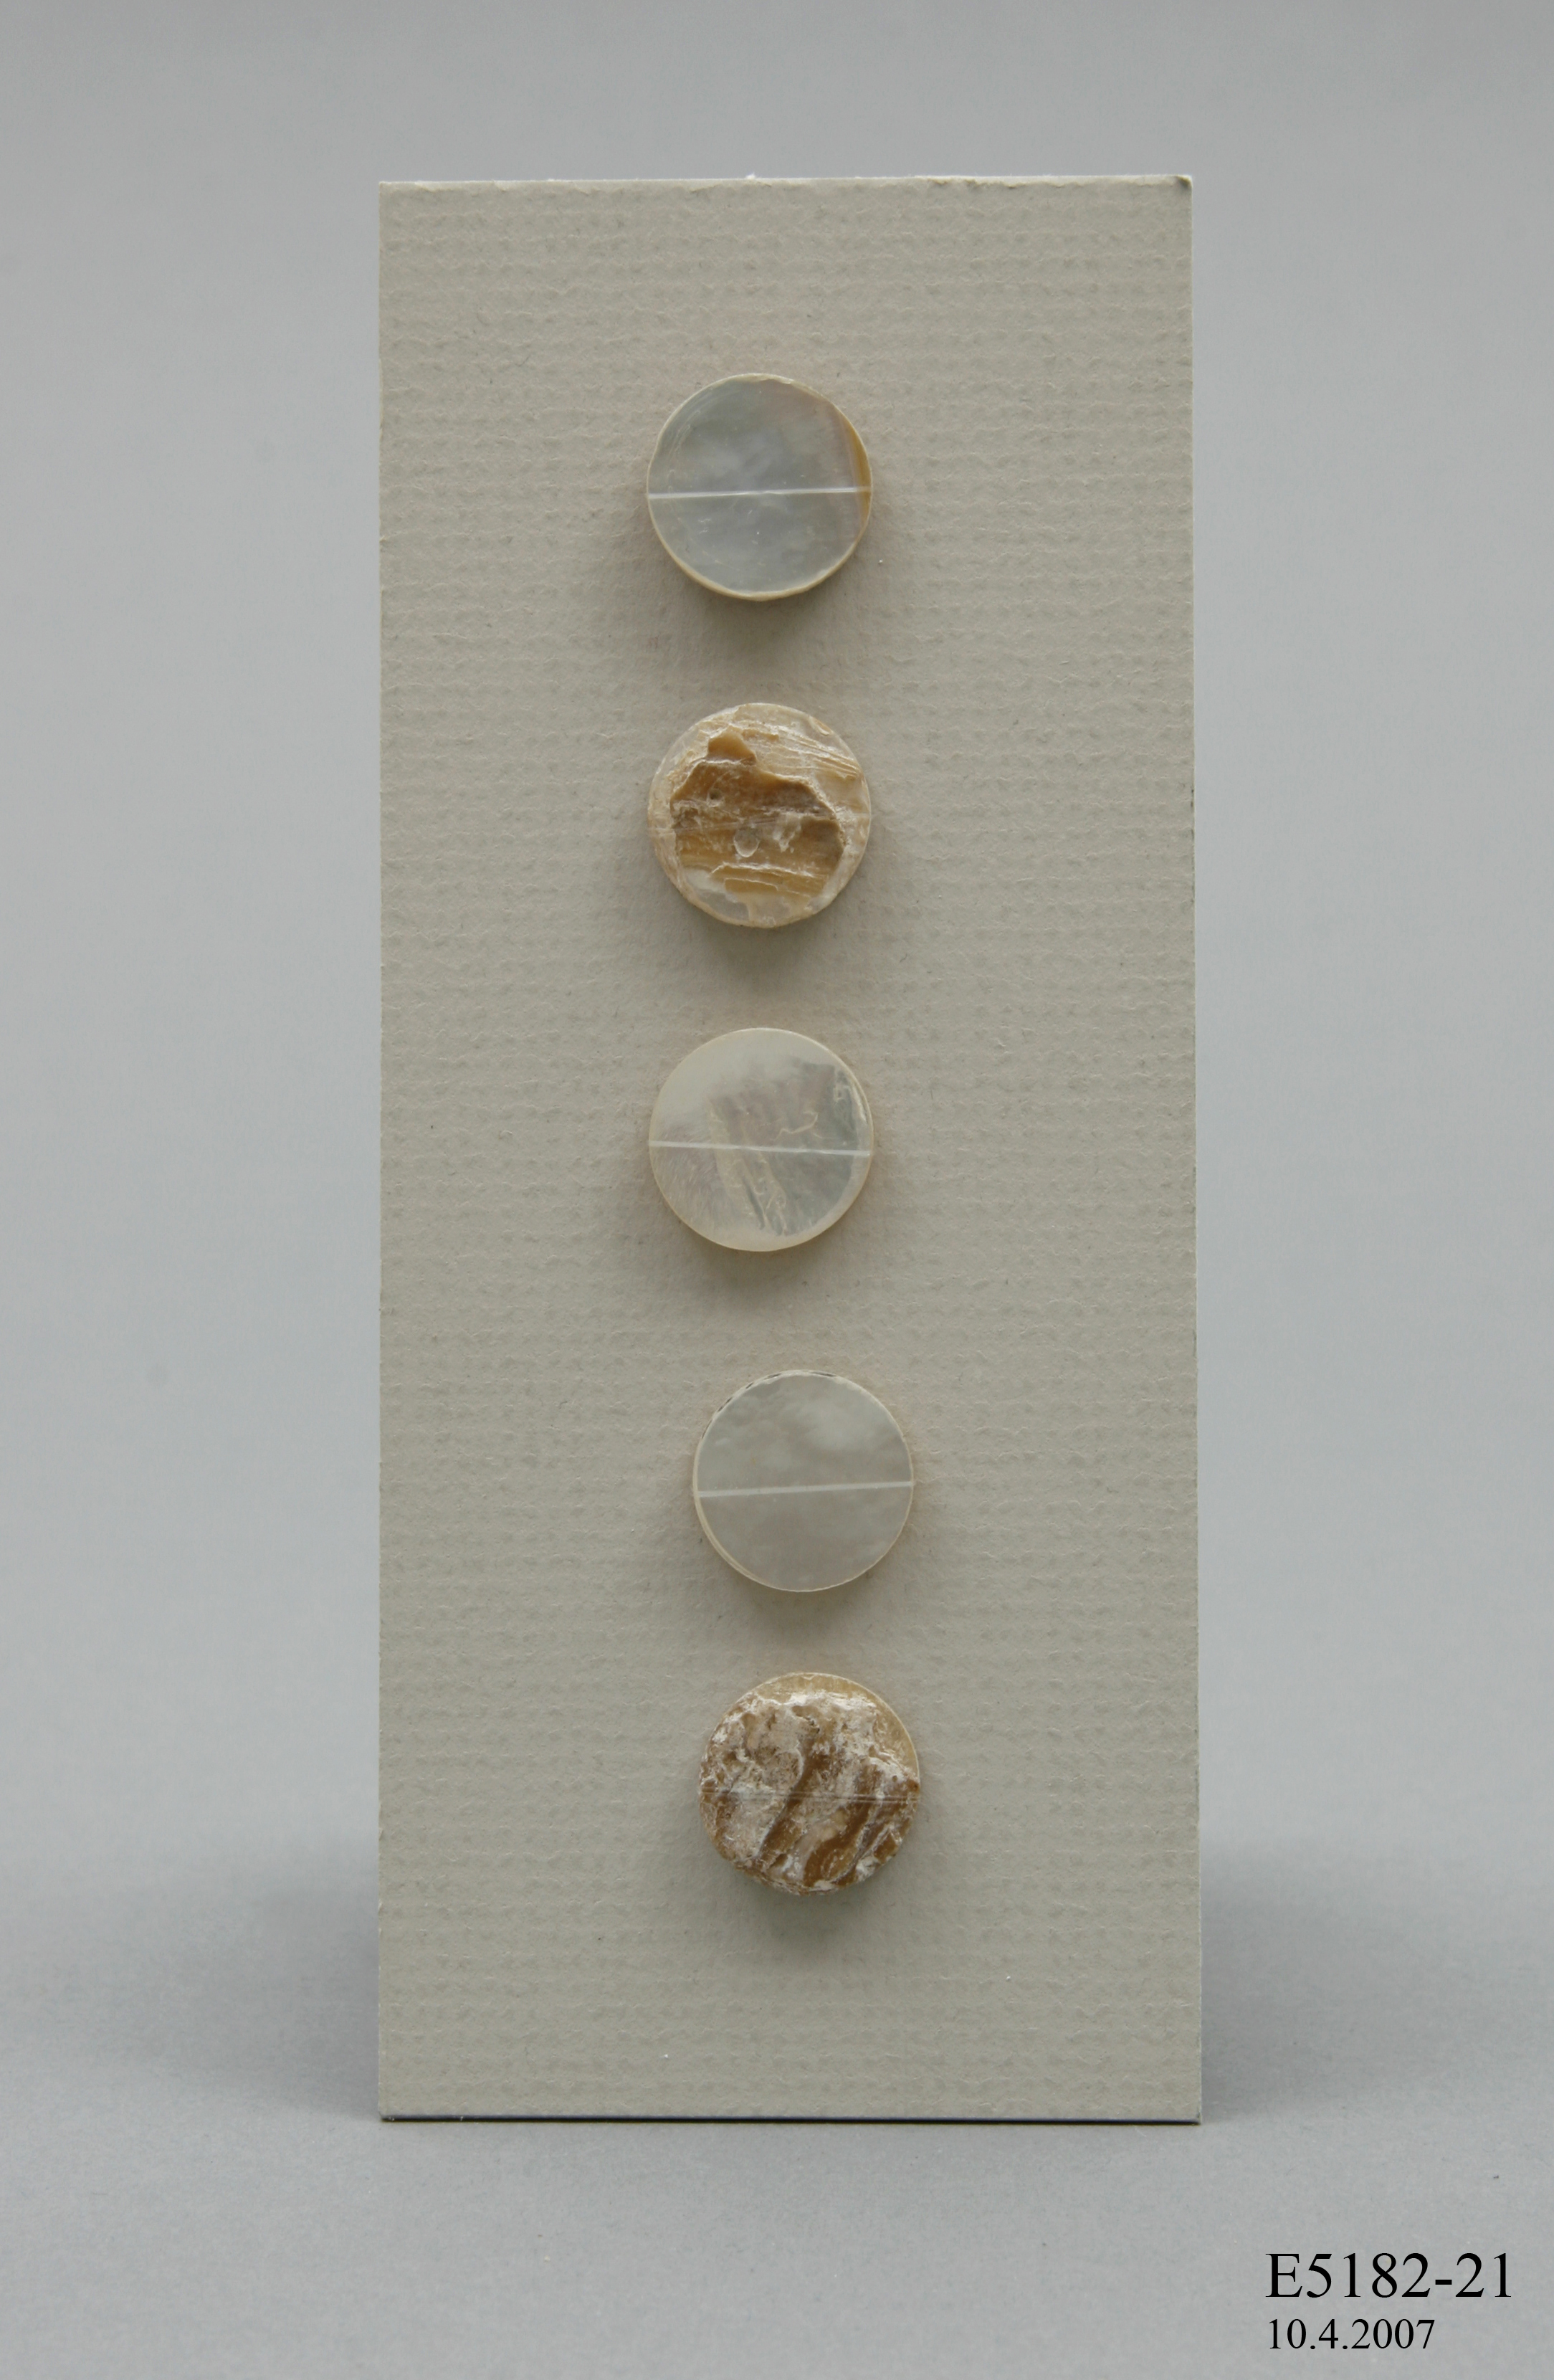 Five split pearl blanks mounted on white card.